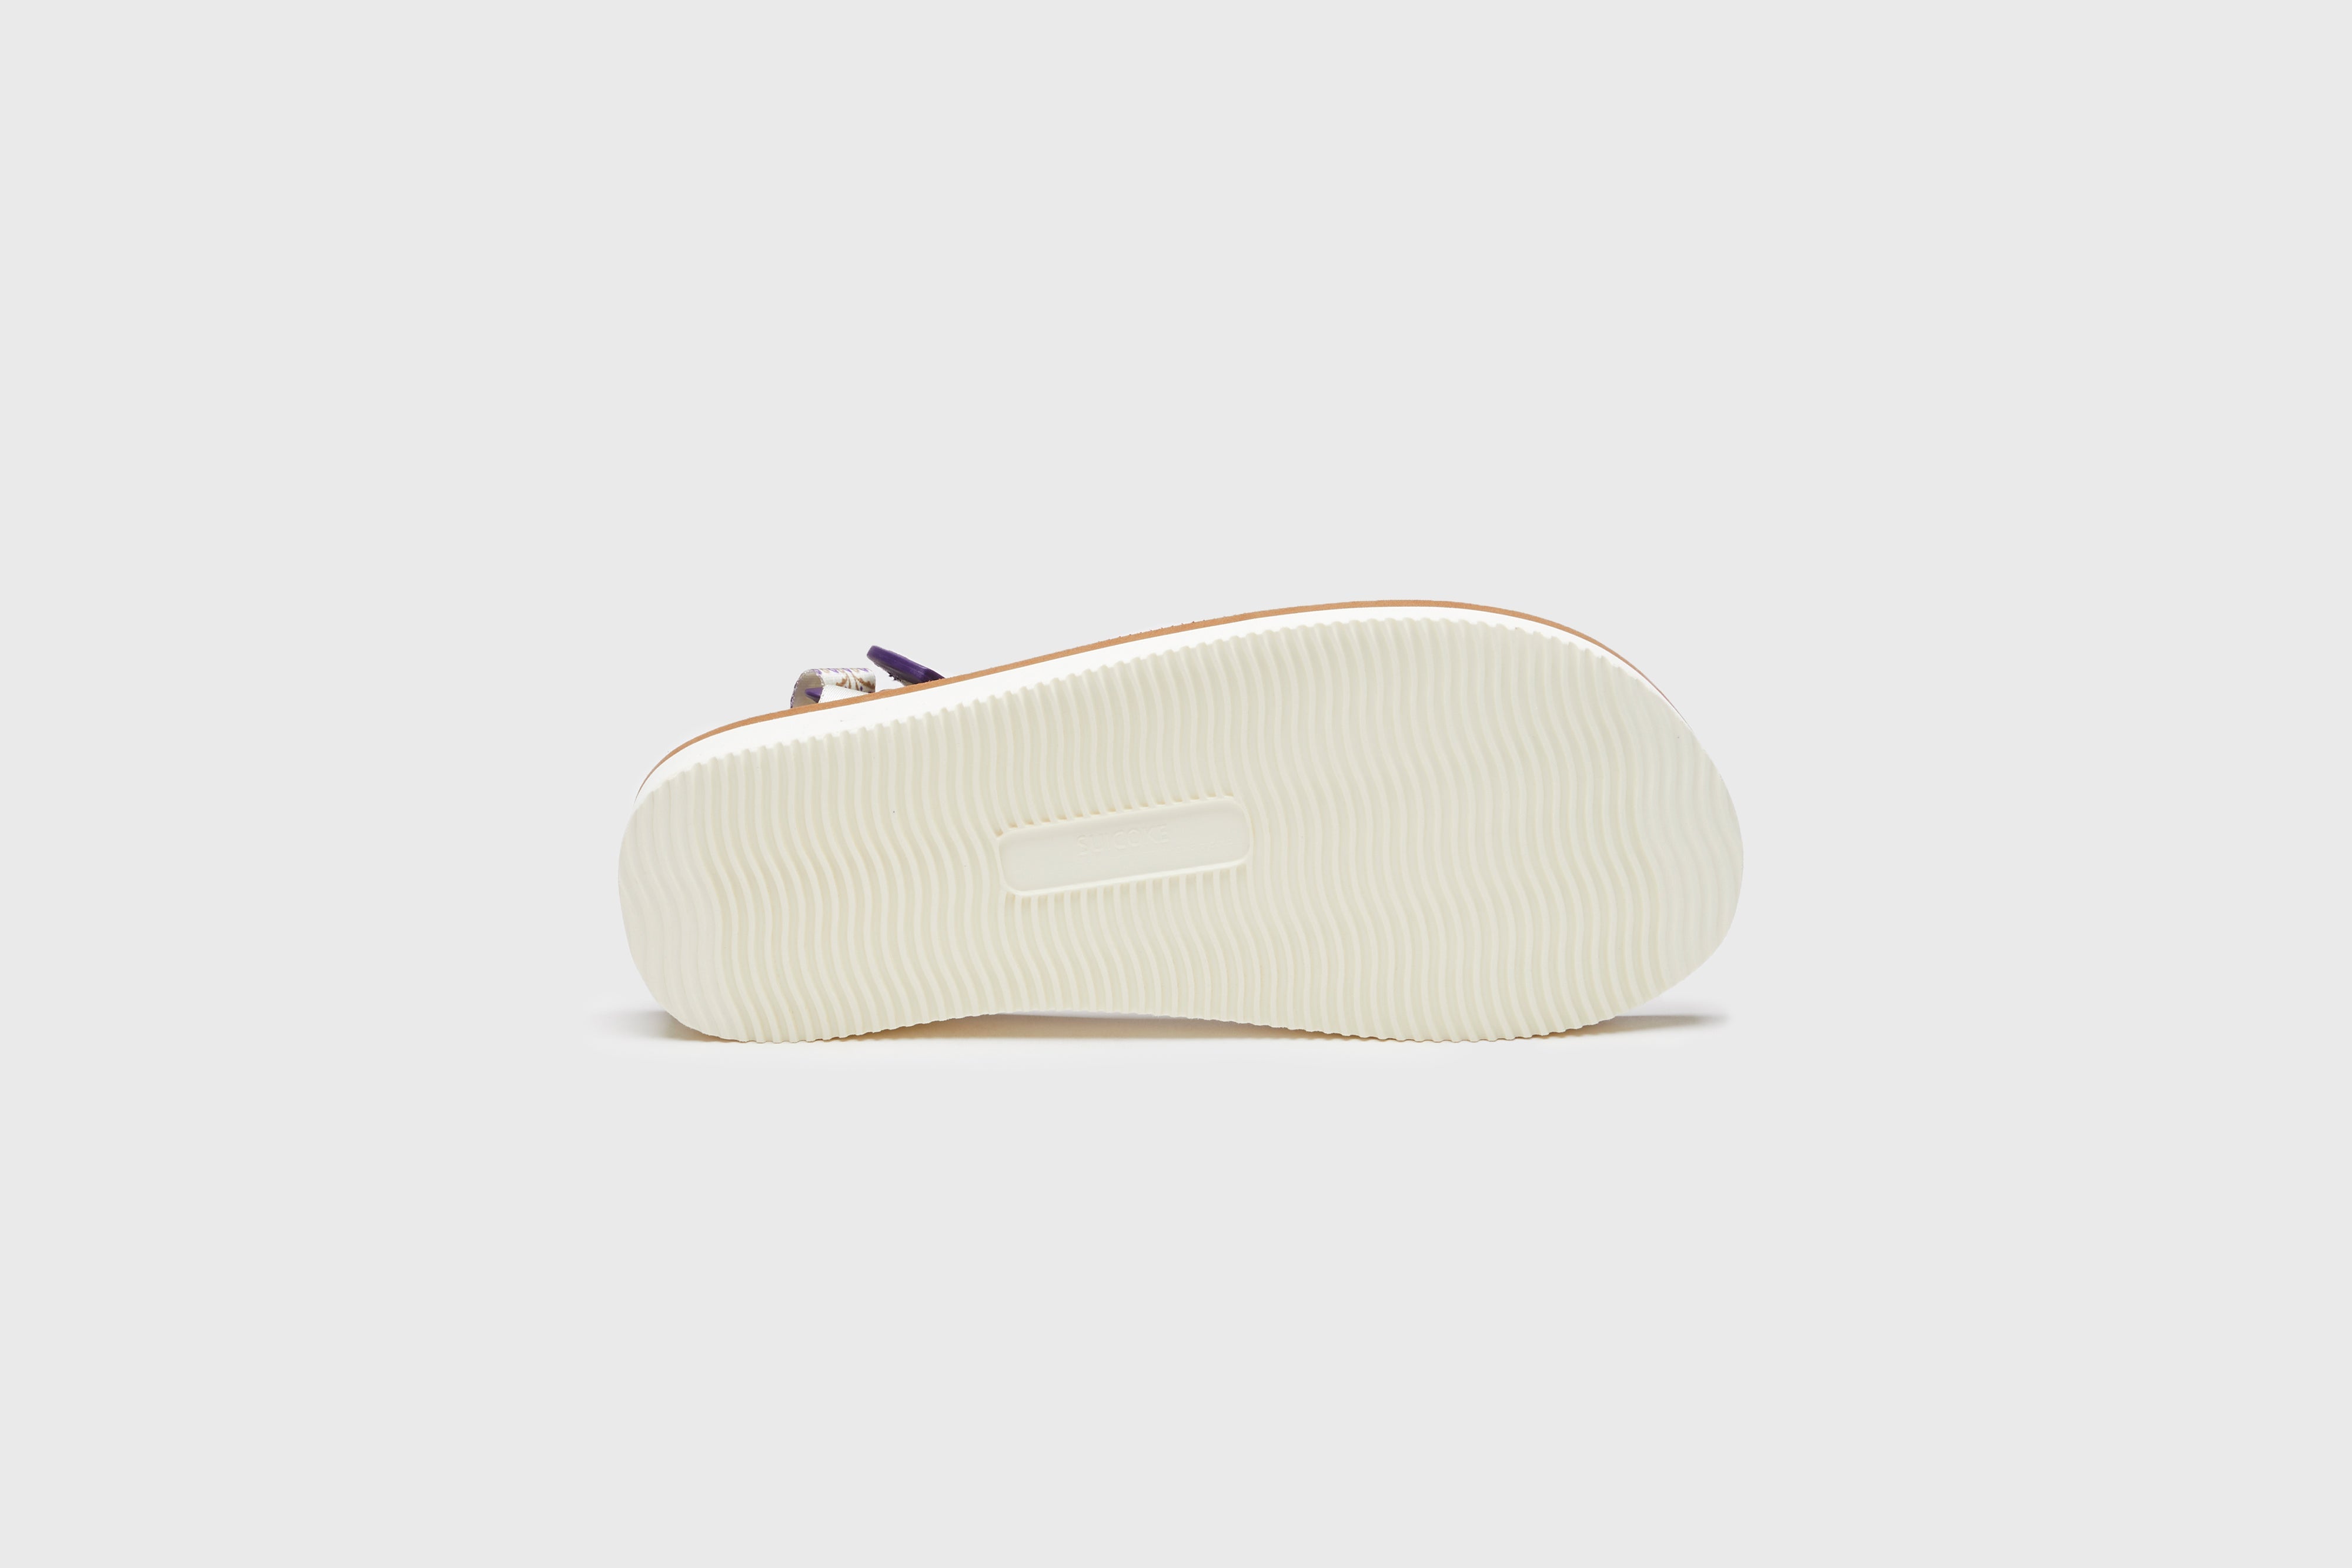 SUICOKE DEPA-Cab-PT05 sandals in Ivory & Brown | eightywingold